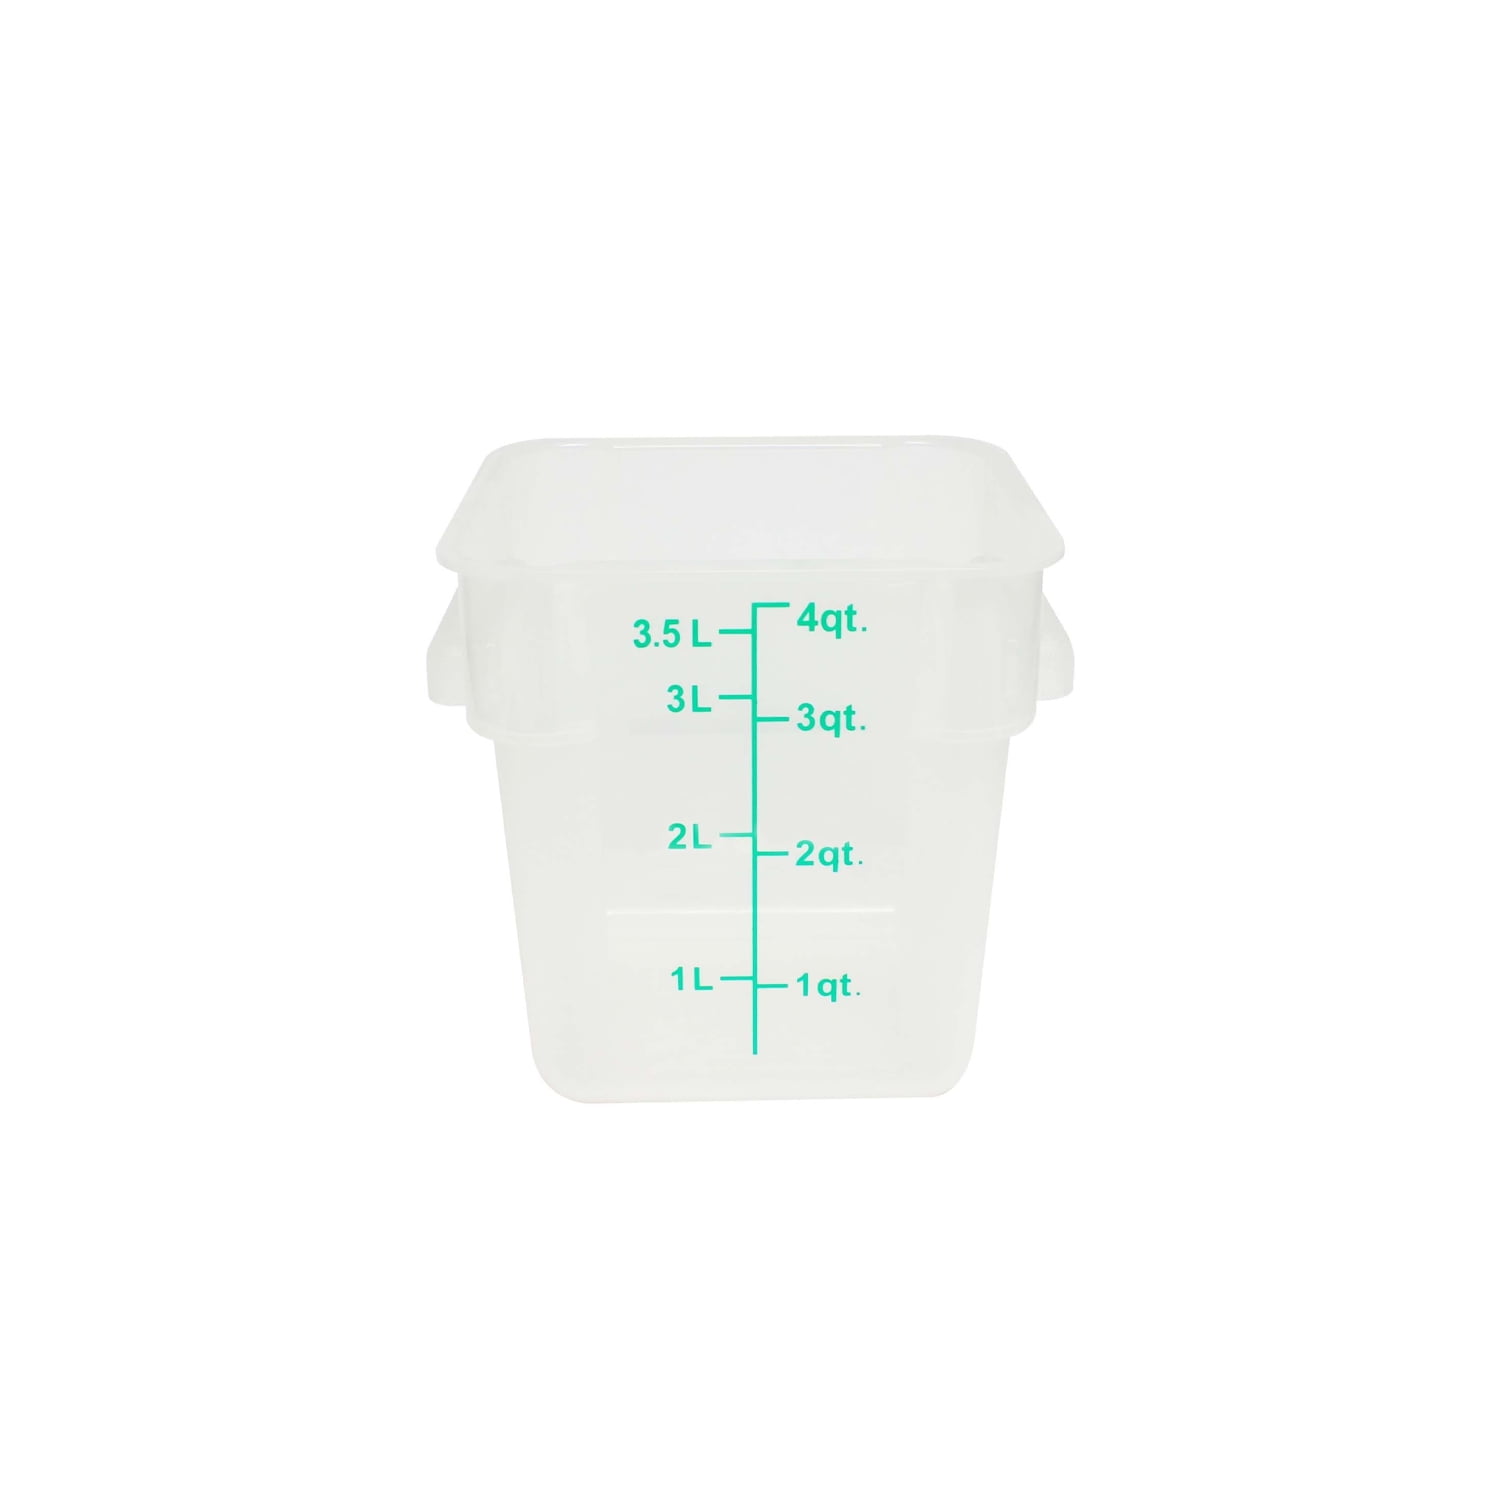  Tupperware Square Smart Saver Container, 3.9 Litres, Color May  Vary : Home & Kitchen